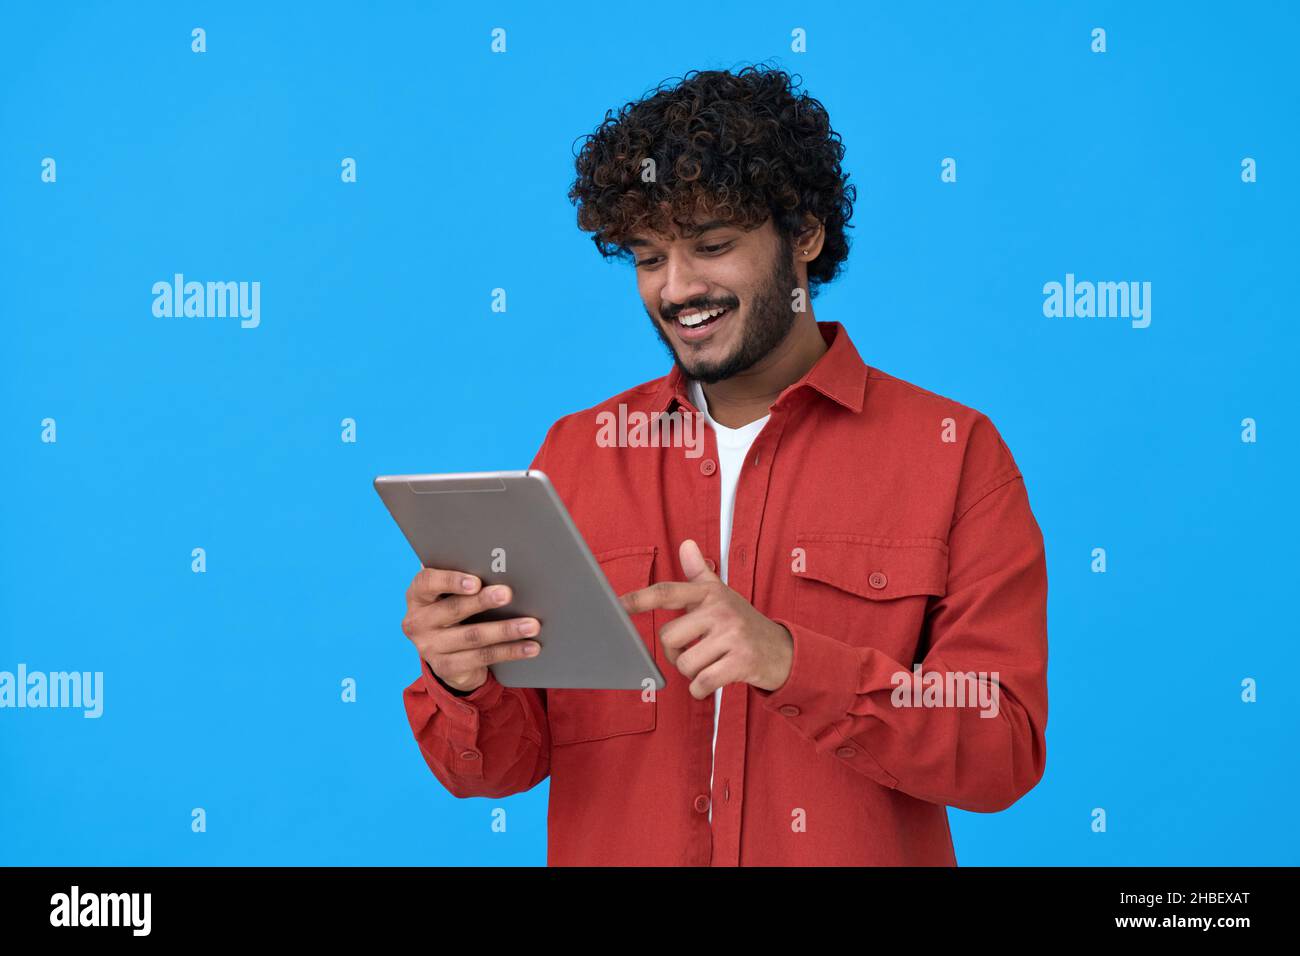 Happy indian guy using digital tablet isolated on blue background. Stock Photo